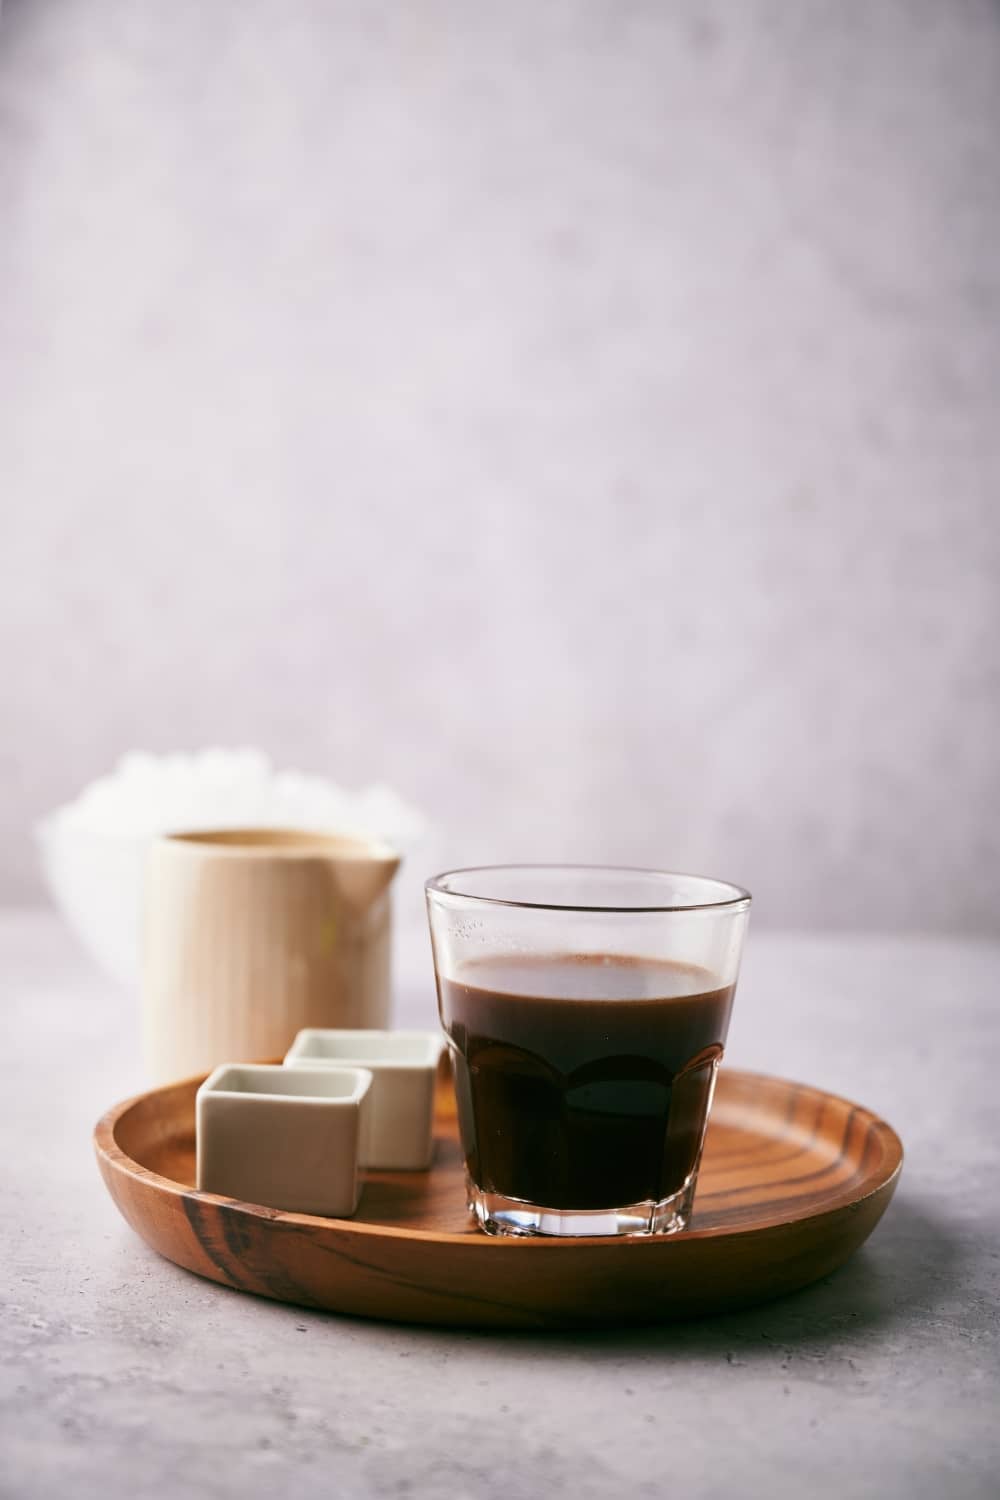 A small glass of coffee next to two small square containers on a wooden tray. A small milk pot is in the back in front of a bowl of ice.